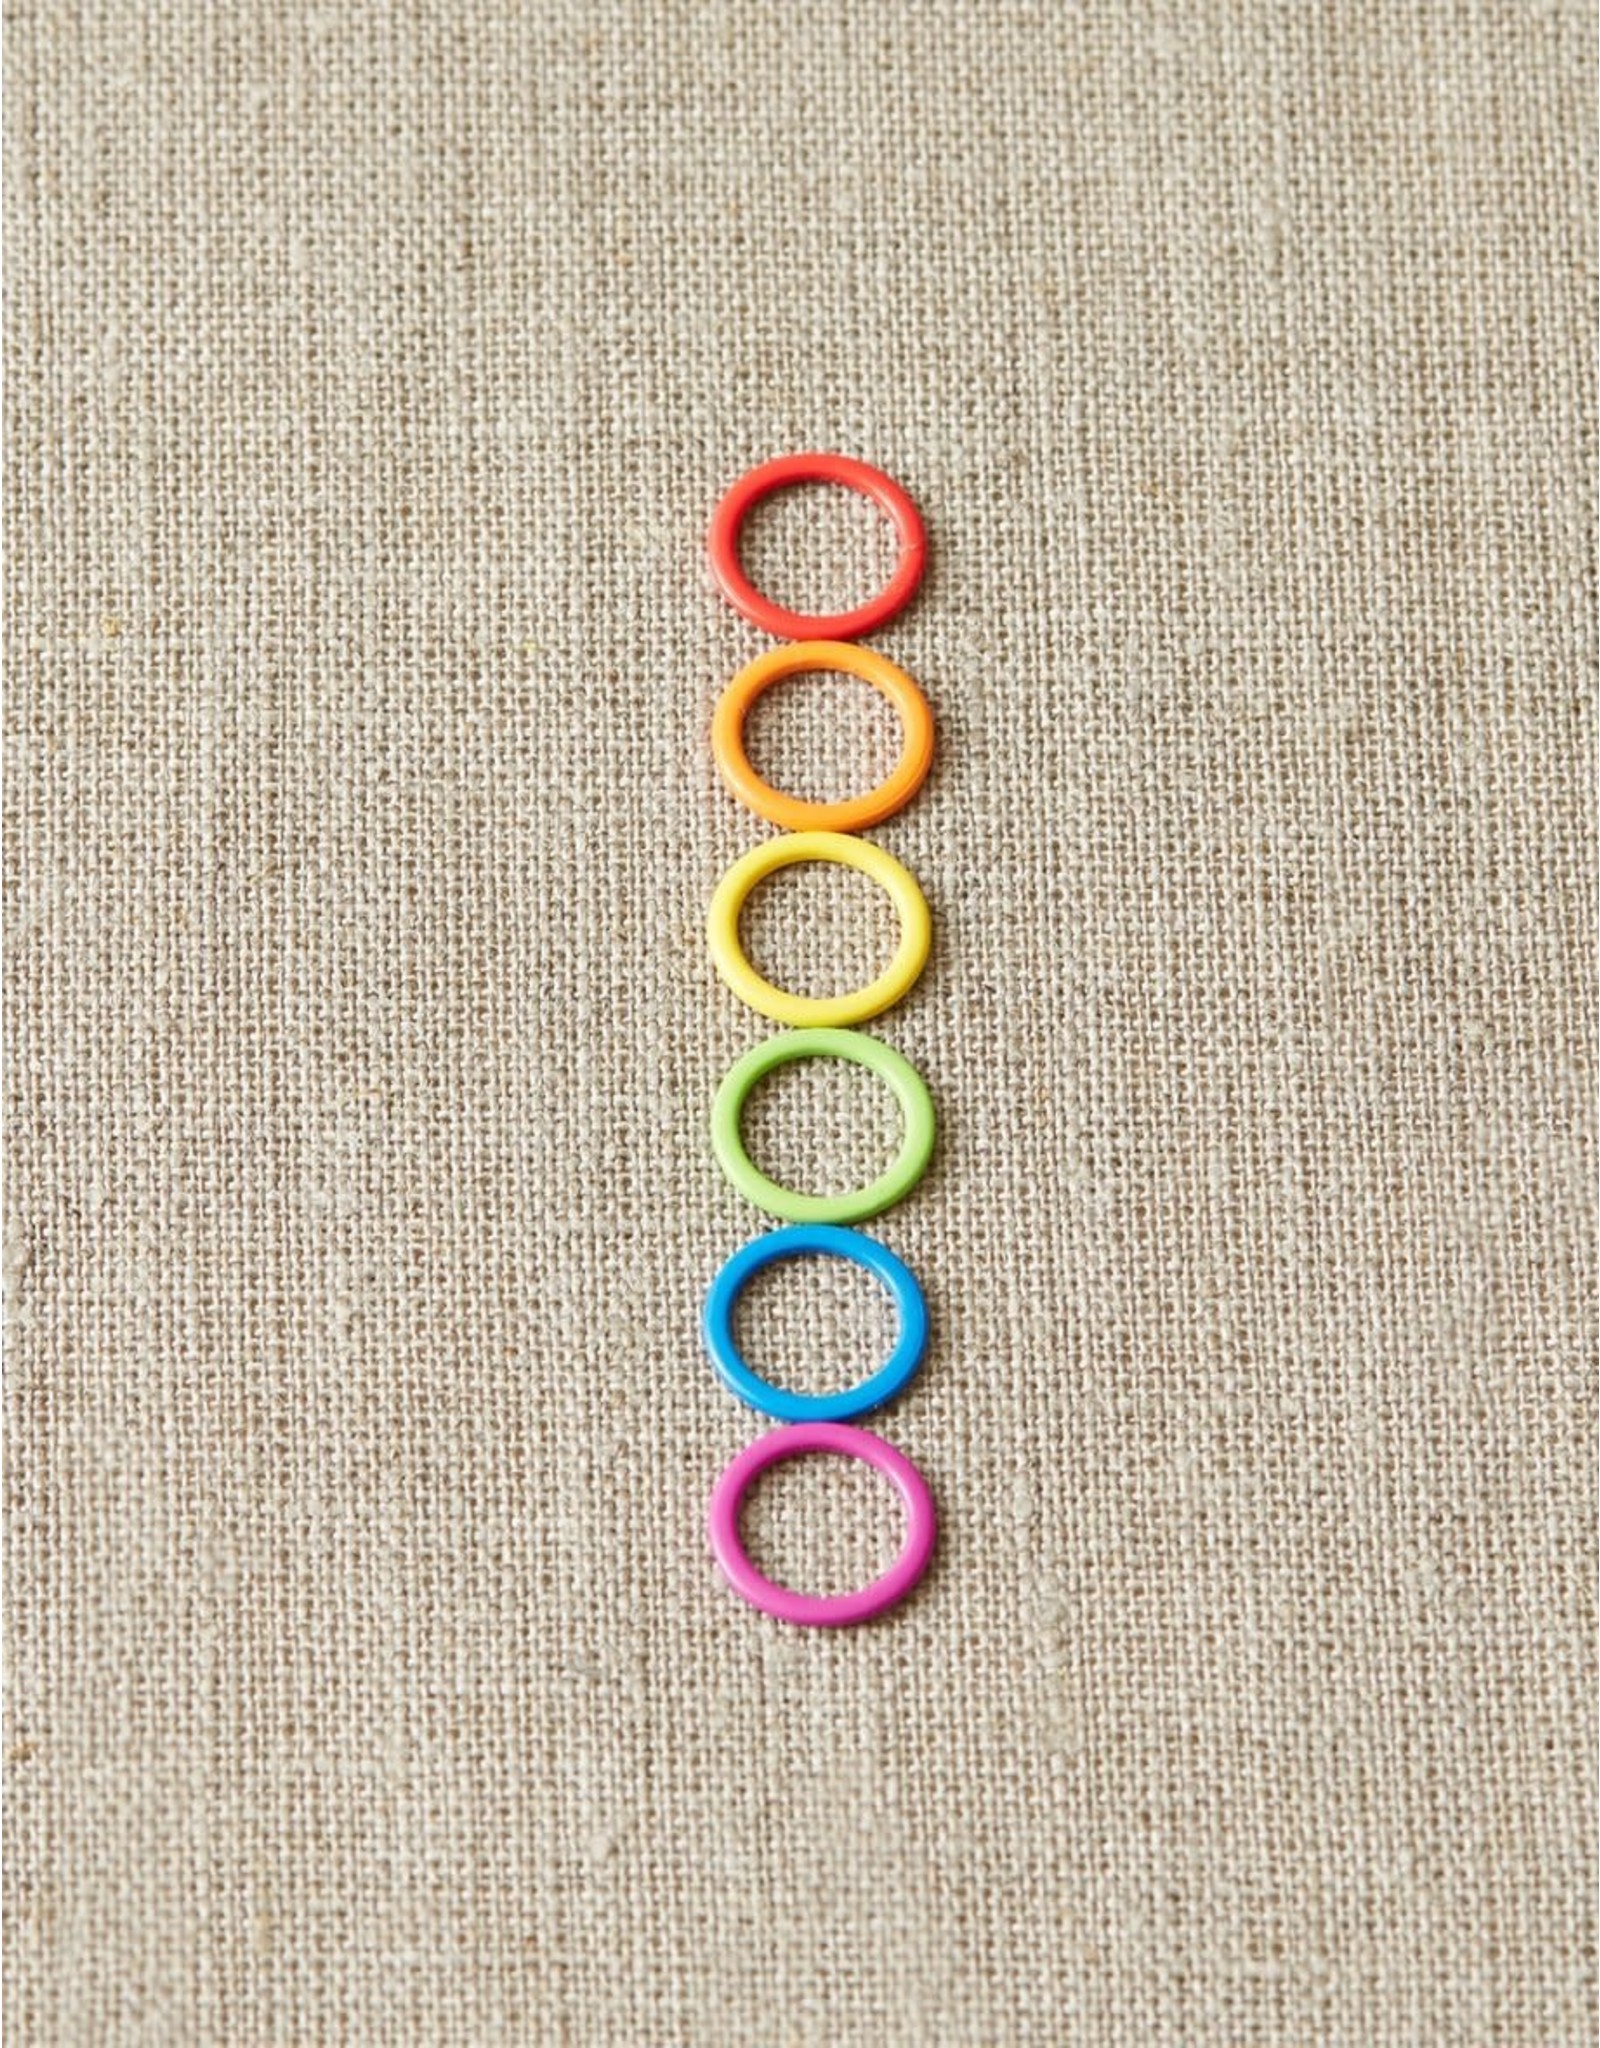 Colorful Ring Stitch Markers by Cocoknits